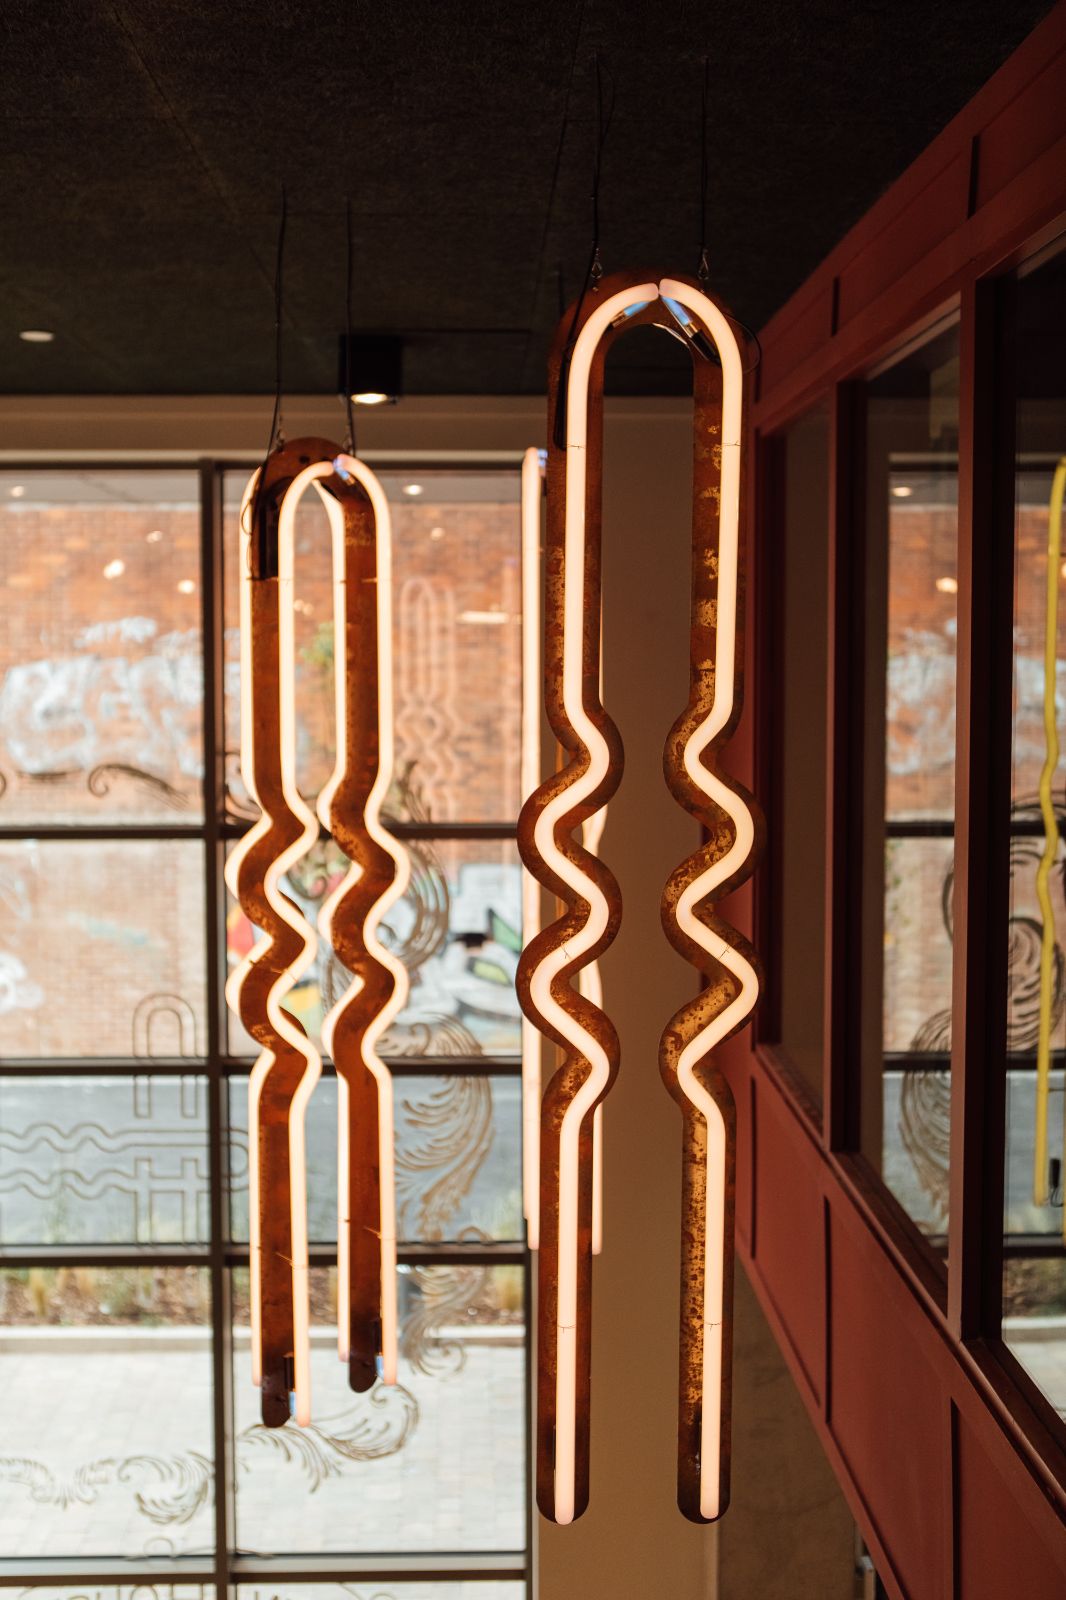 Neon hairpins by Neon workshop suspended within the Hairpin House apartment building (BTR) entrance.